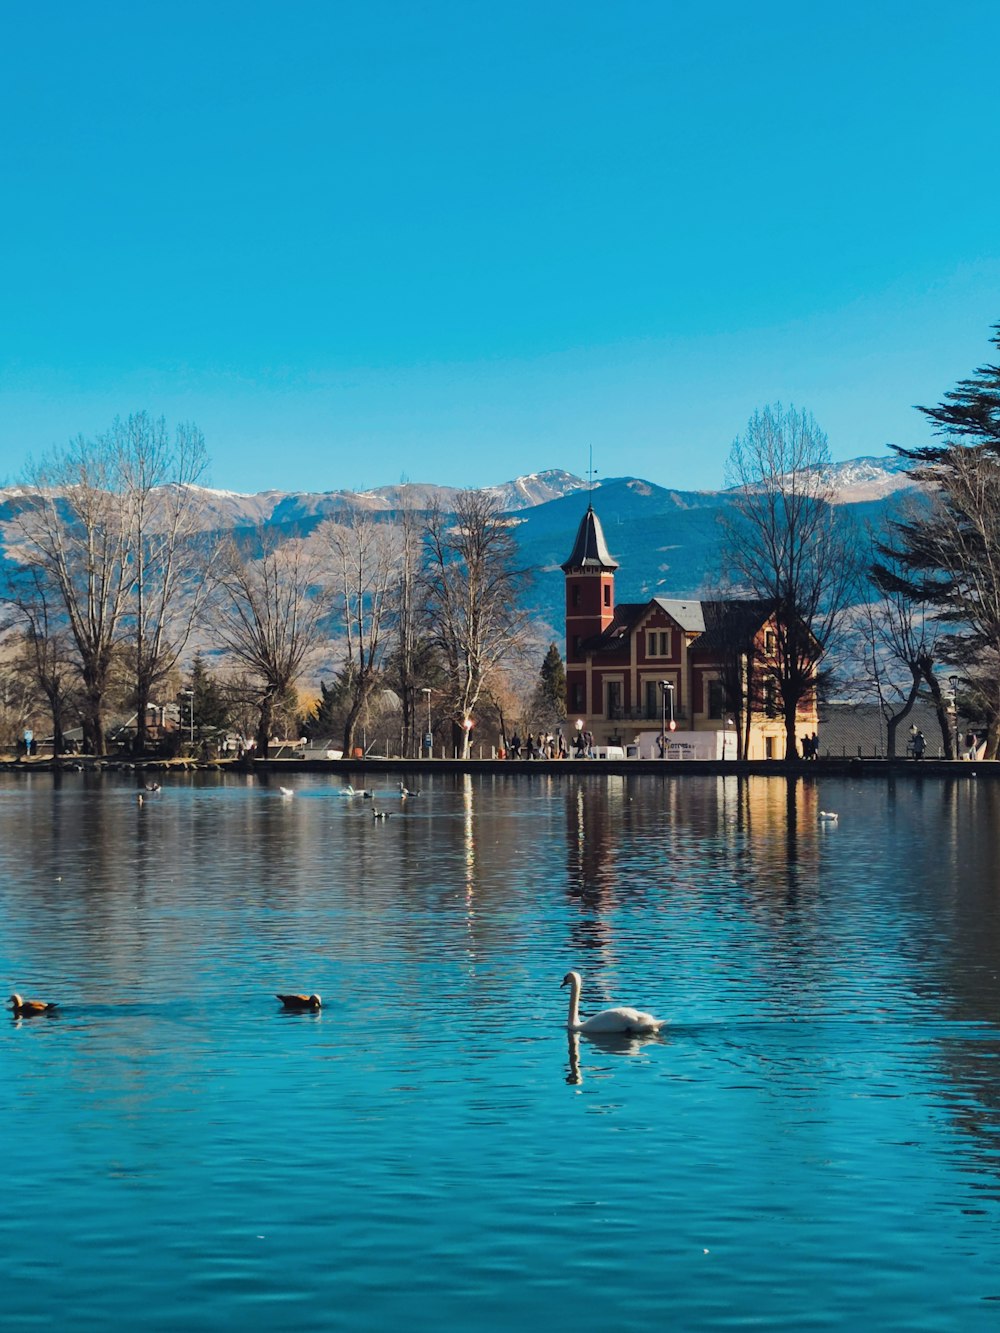 swans swimming in a lake with a church in the background